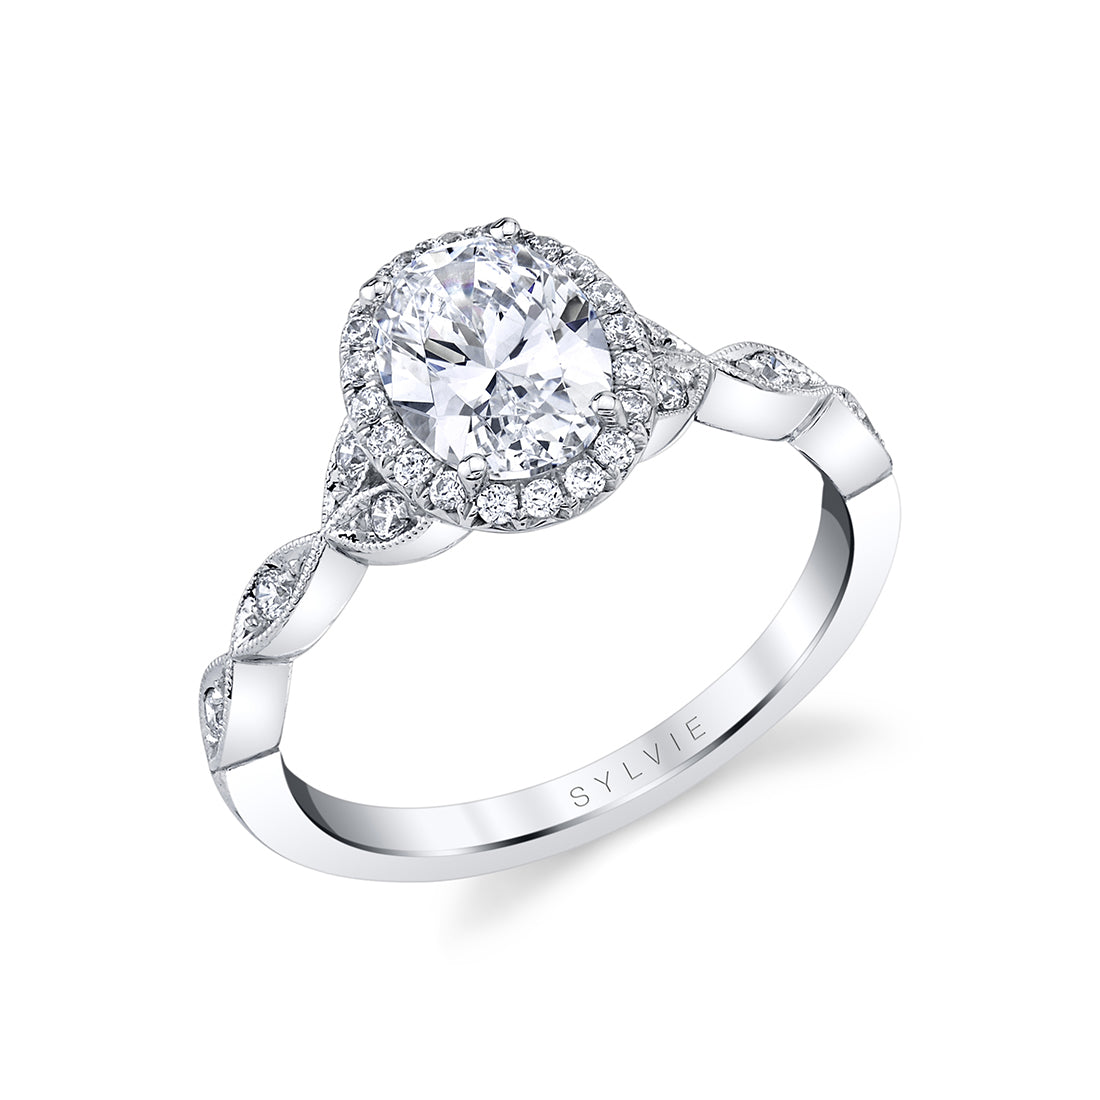 Sylive 14K White Gold "Frederique" Oval Diamond Halo Engagement Ring